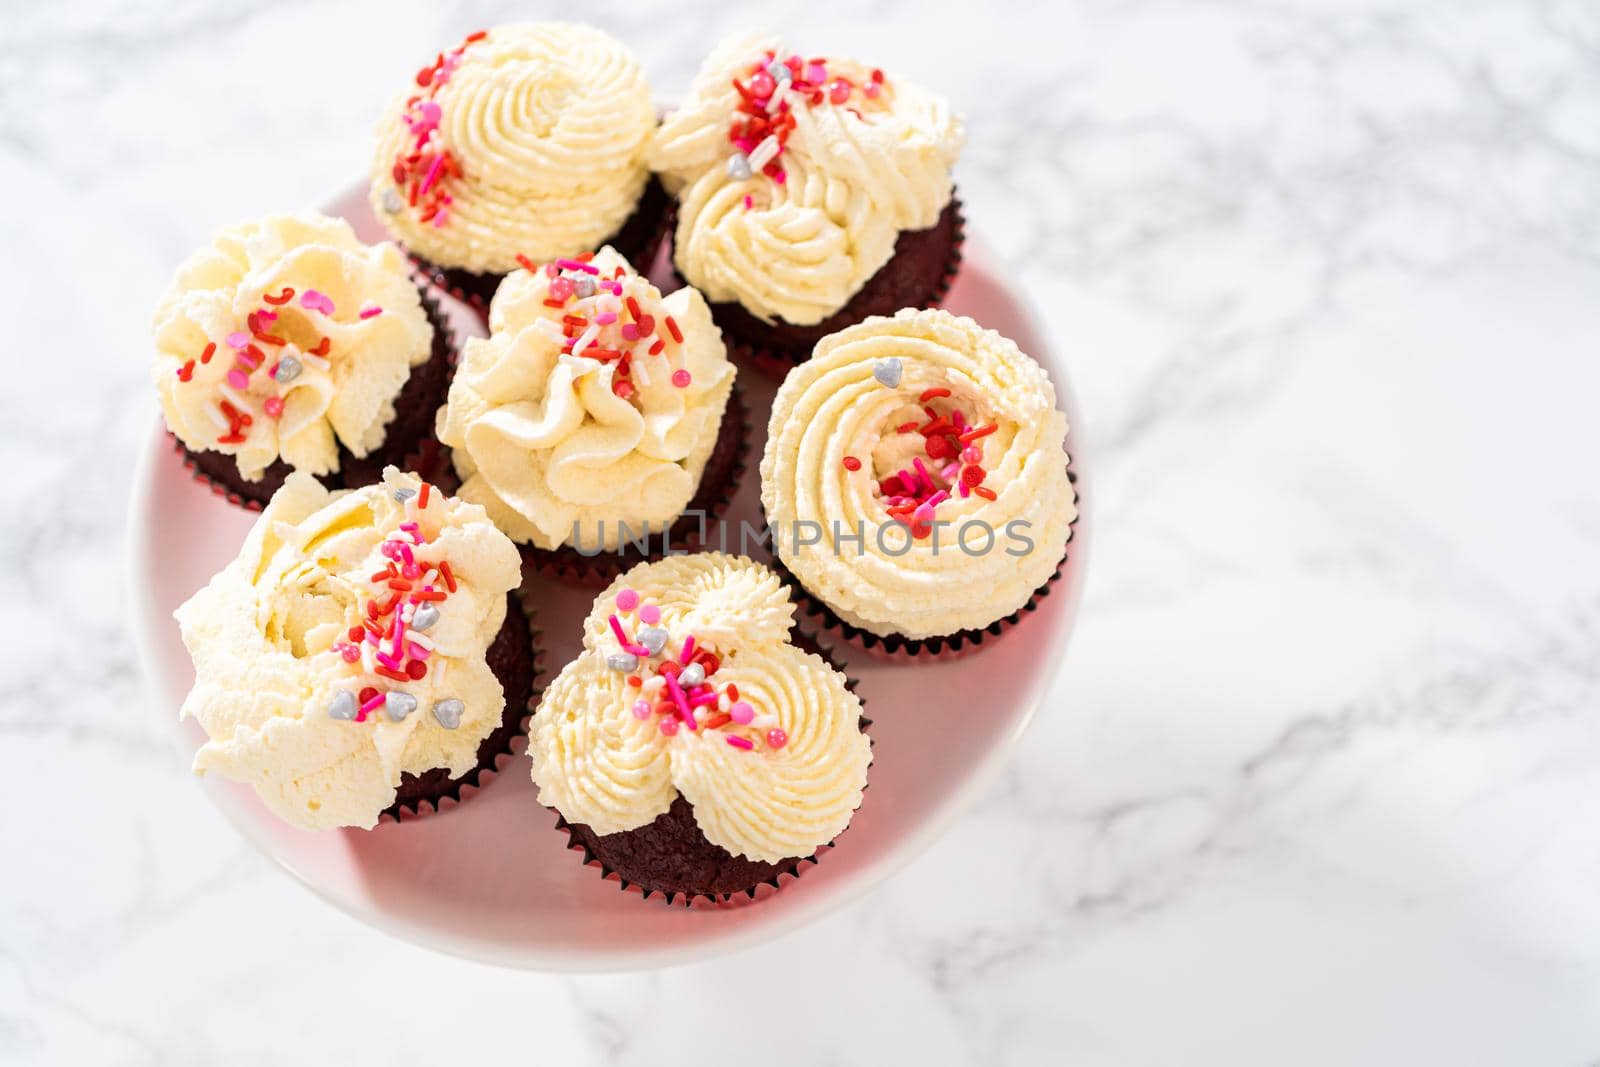 Freshly baked velvet cupcakes with white chocolate ganache frosting decorated with sprinkles.